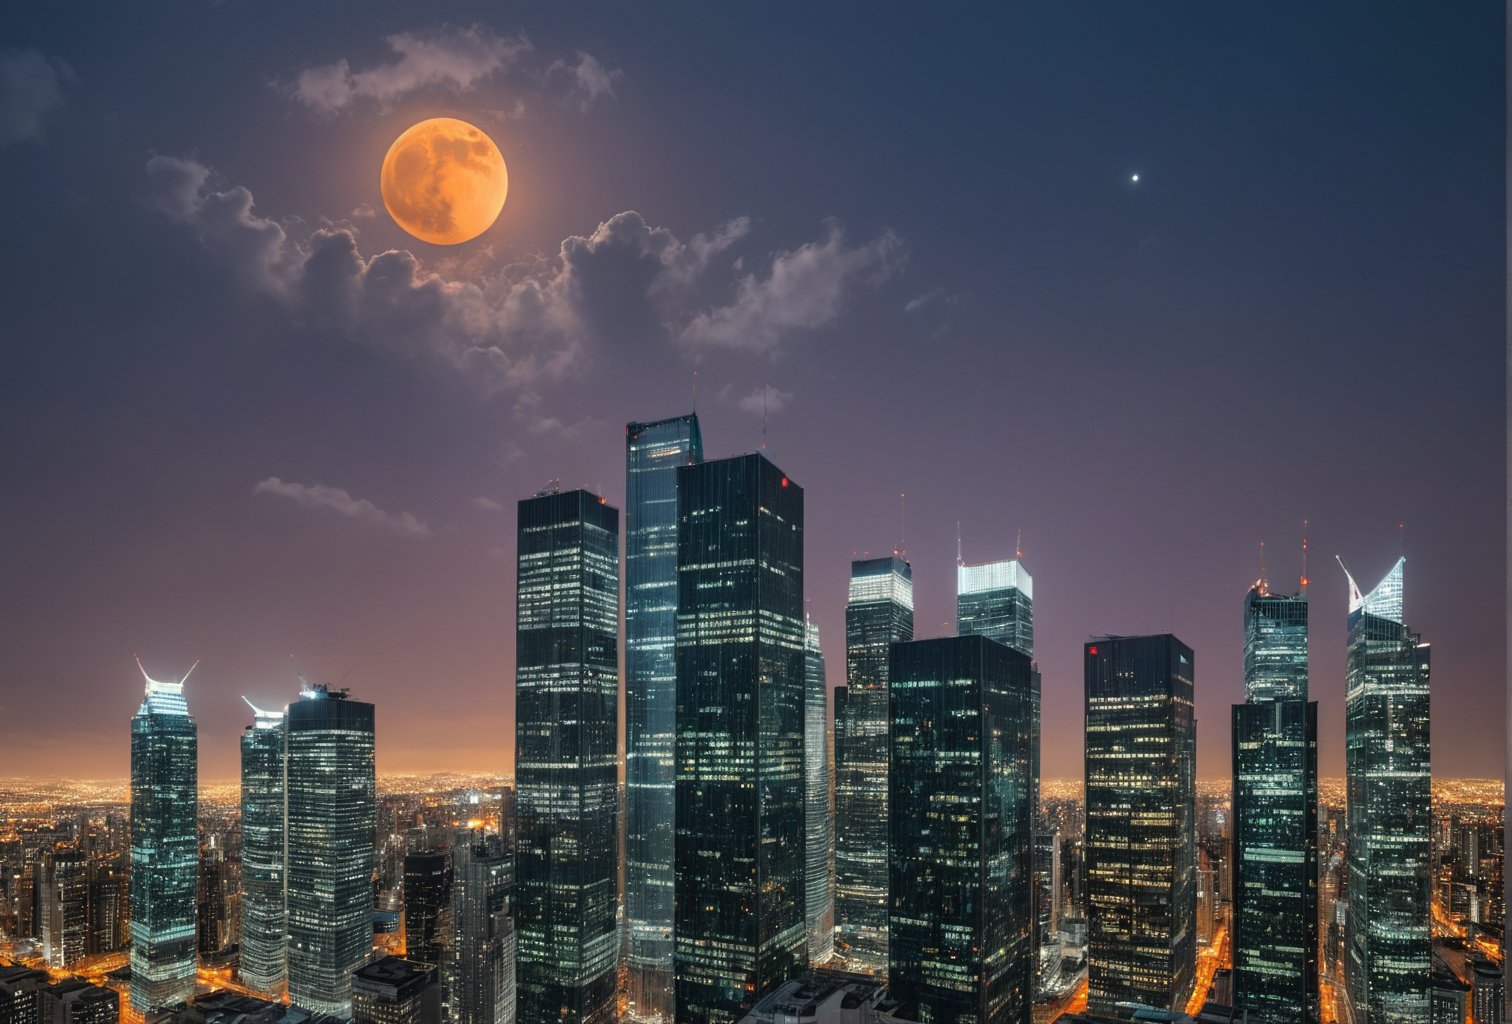 night, dark-orange cloud lumened by city, bright moon, dark-gray-purple sky; sky scrapers square and rectangular skyscrapers with white frequent square windows, shades of skyscraper windows: dark blue, dark turquoise. The roofs of skyscrapers from dark squares or illuminated with a dim blue border,